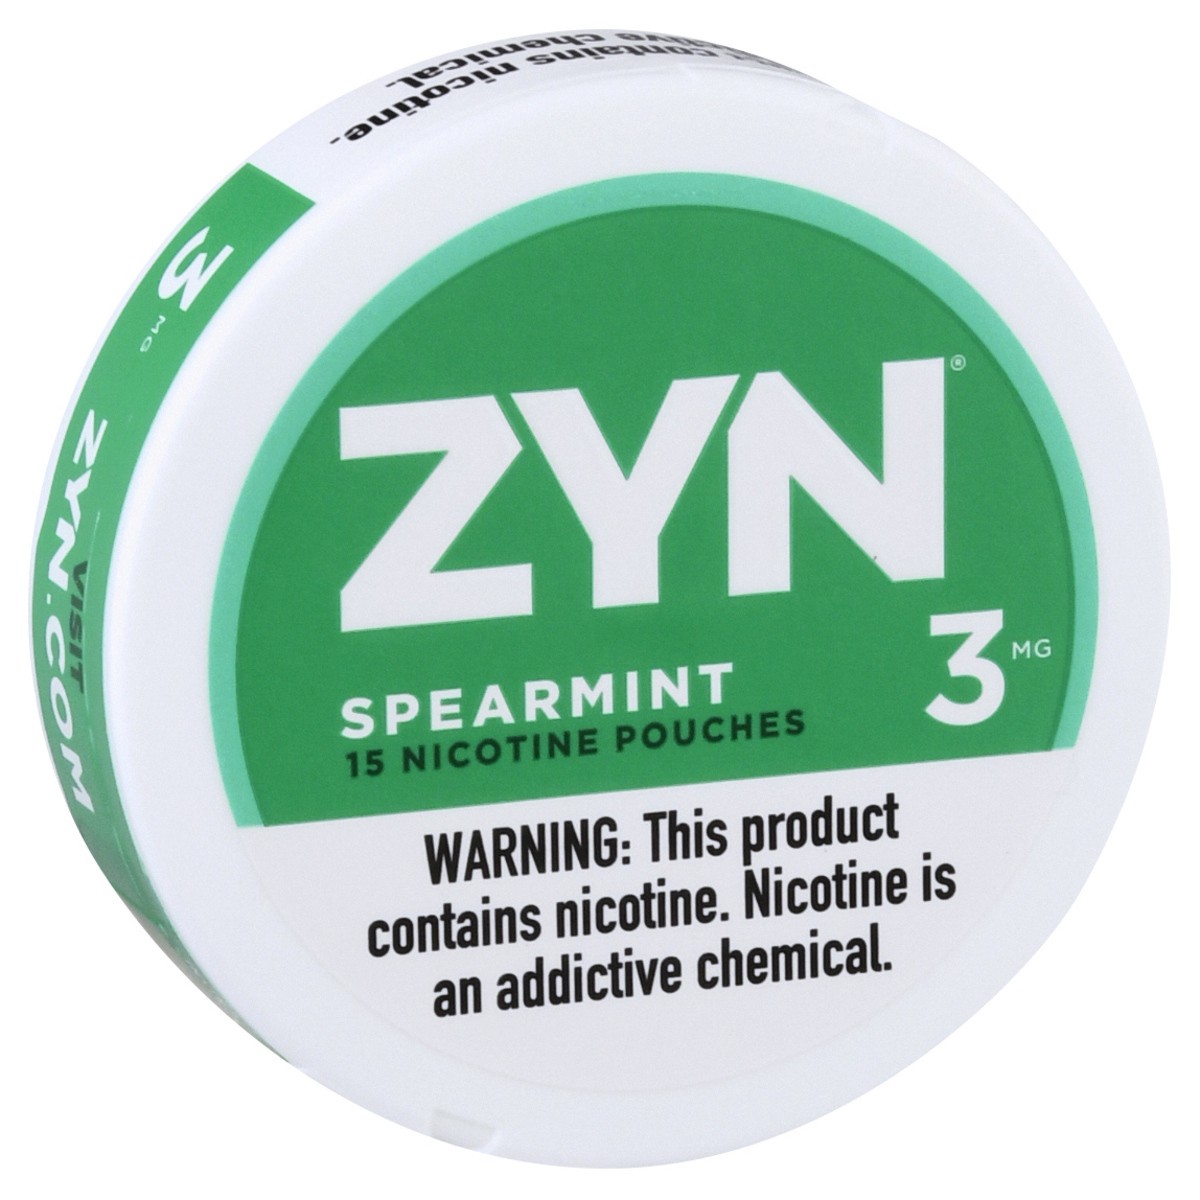 slide 4 of 10, Zyn Spearmint 3Mg Nicotine Pouches, 15 ct